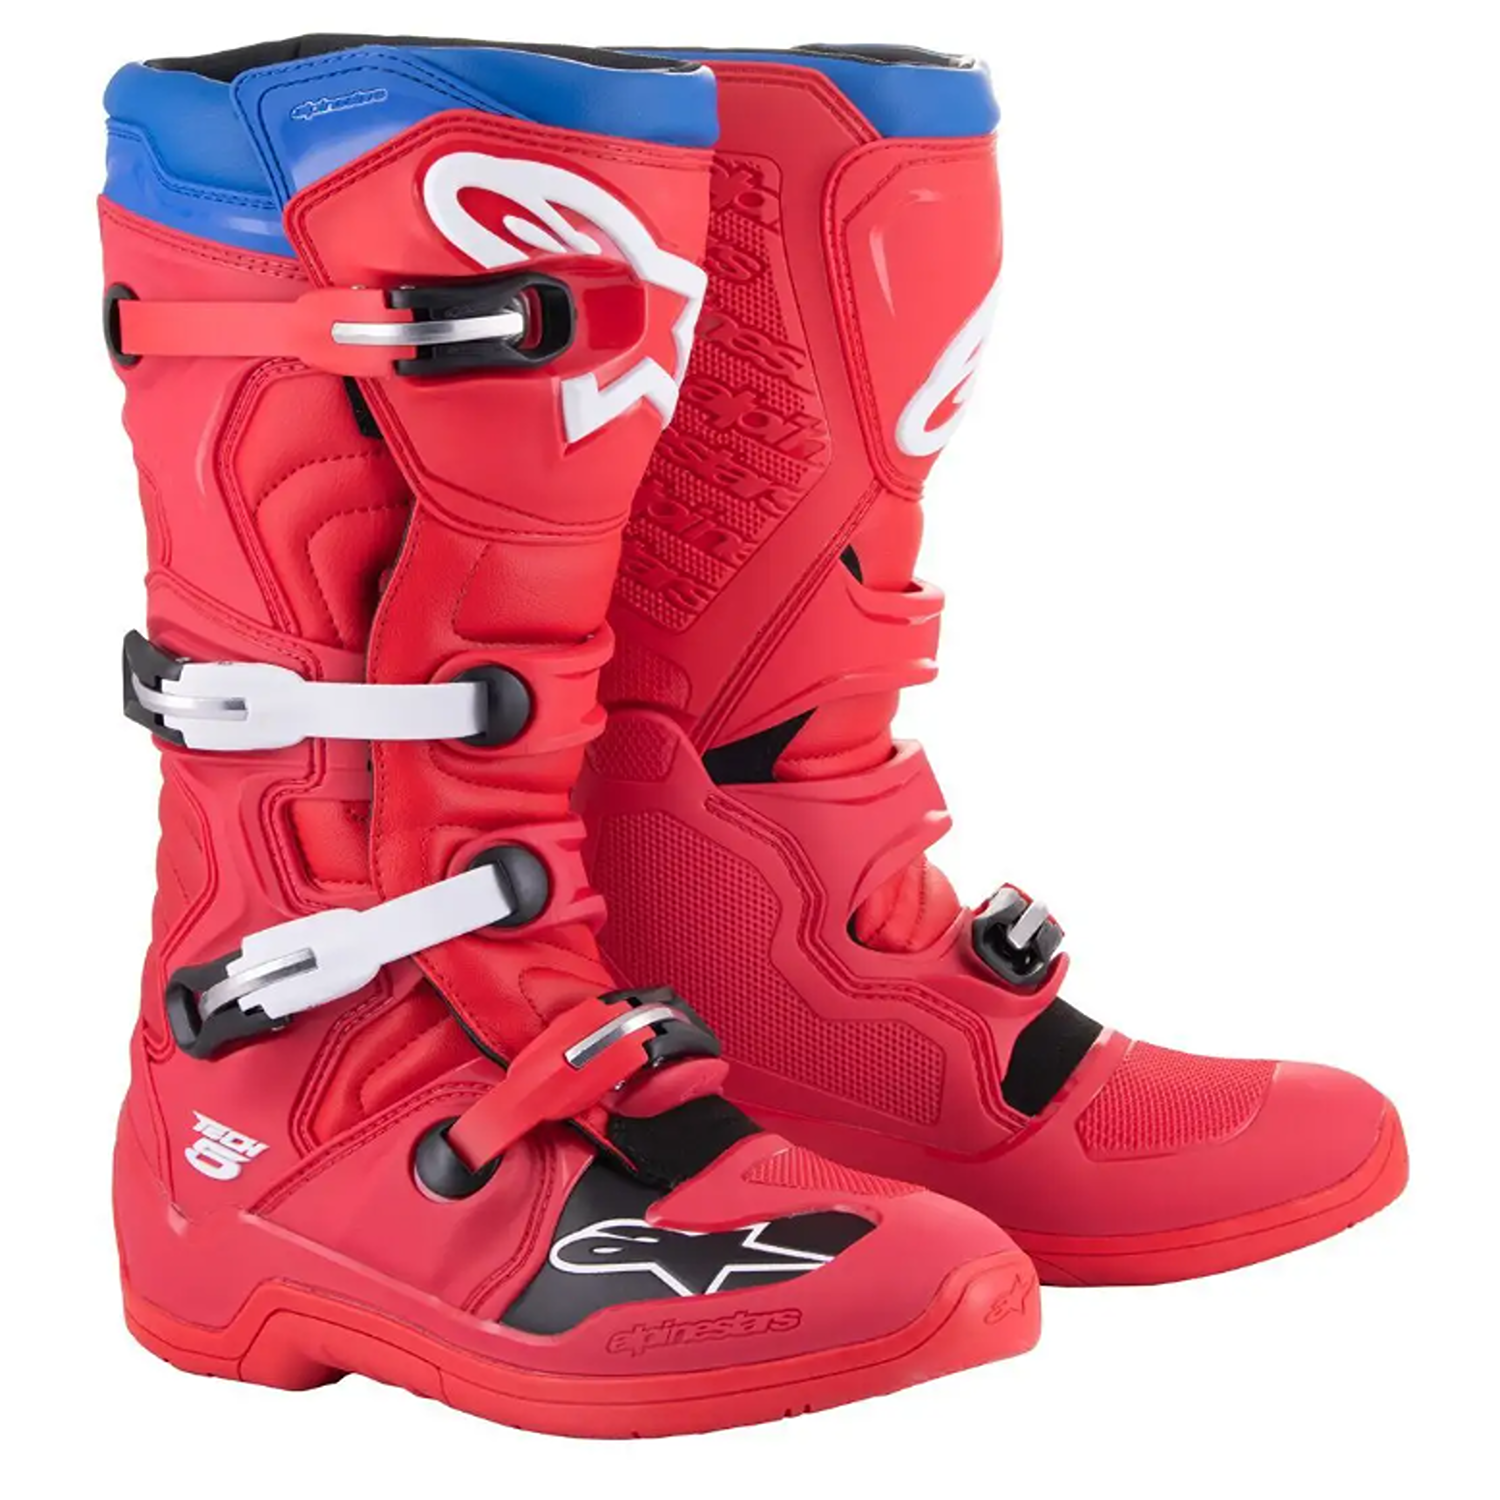 Image of EU Alpinestars Tech 5 Boots Bright Red Dark Red Blue Taille US 8